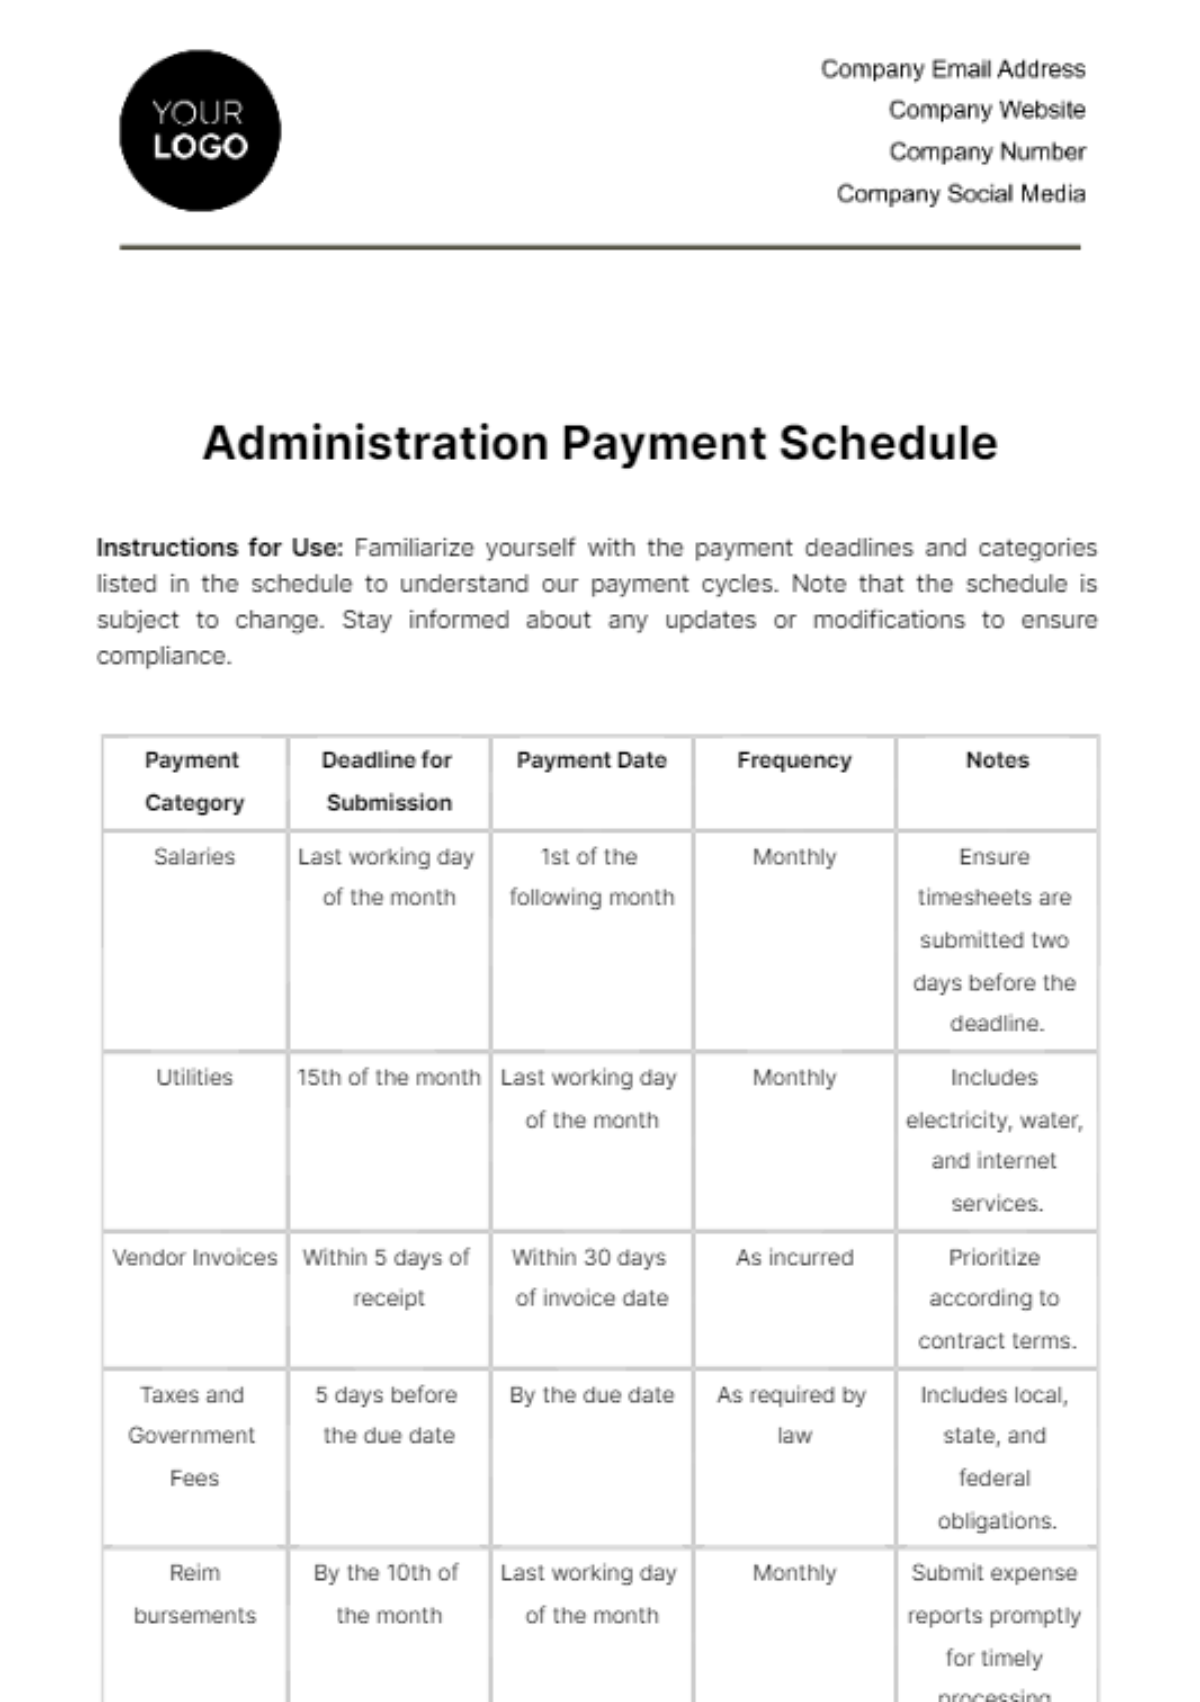 Administration Payment Schedule Template